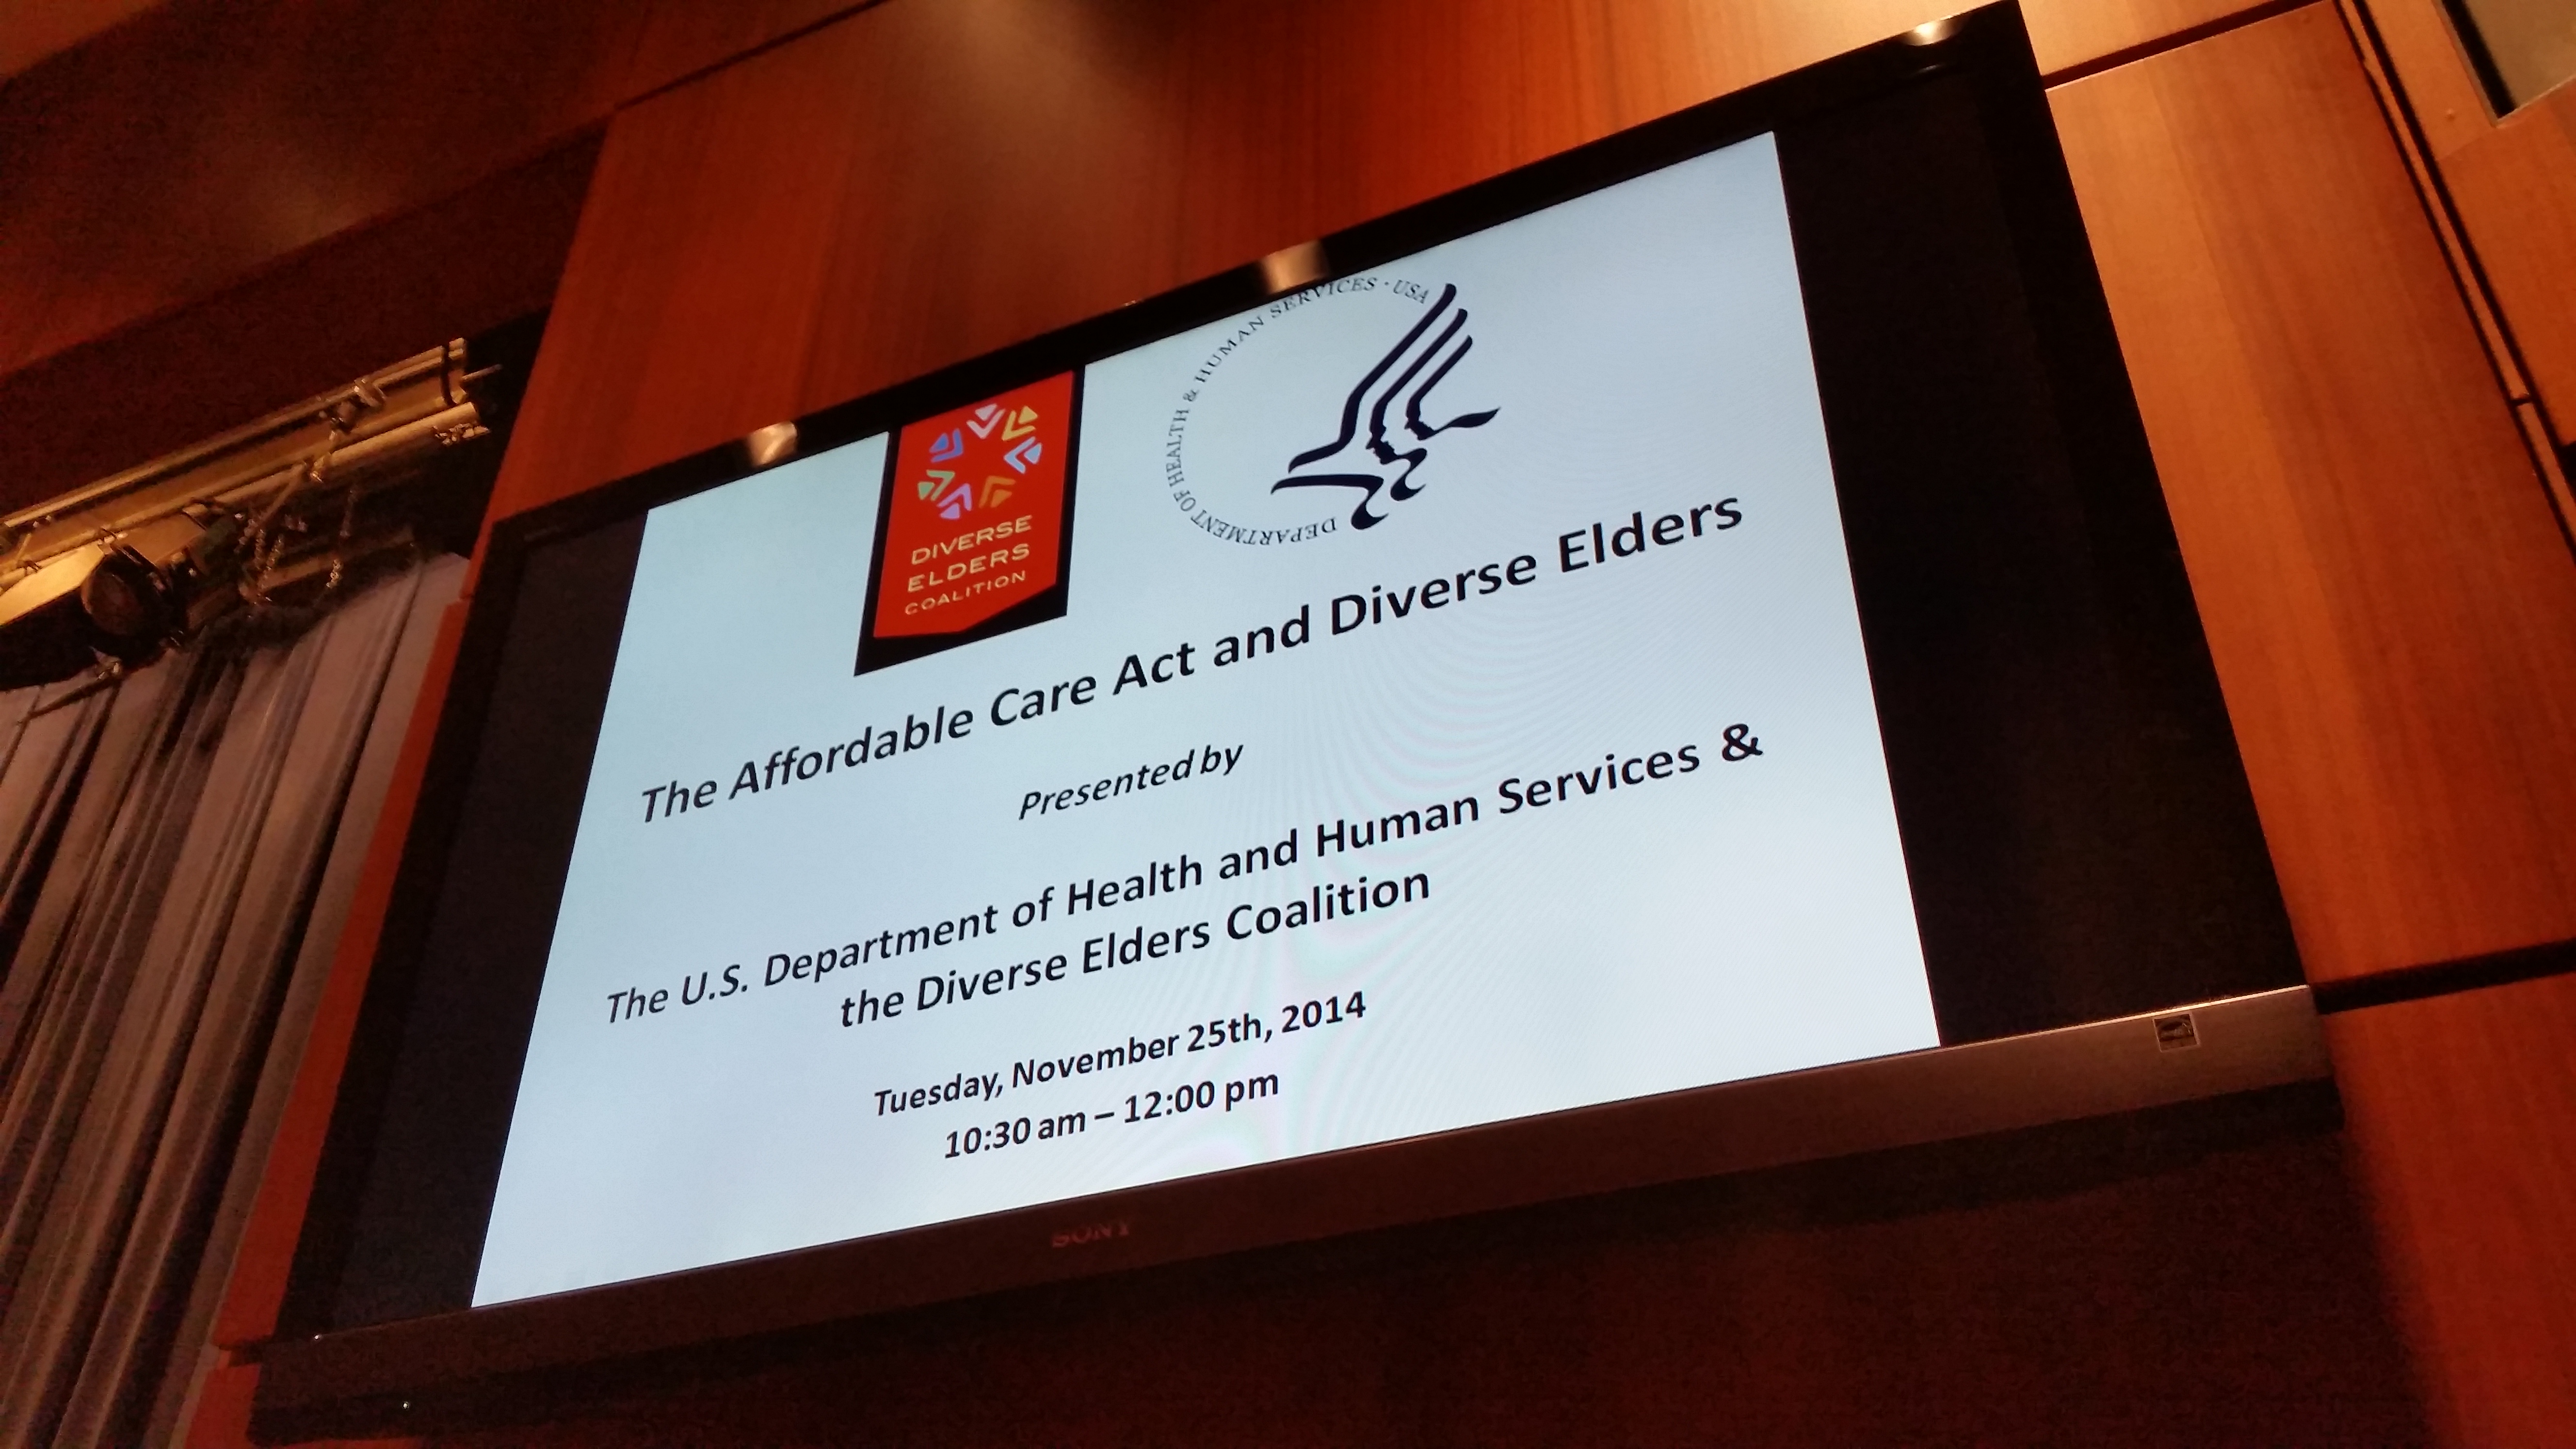 DEC and HHS Host “Affordable Care Act and Diverse Elders” Event